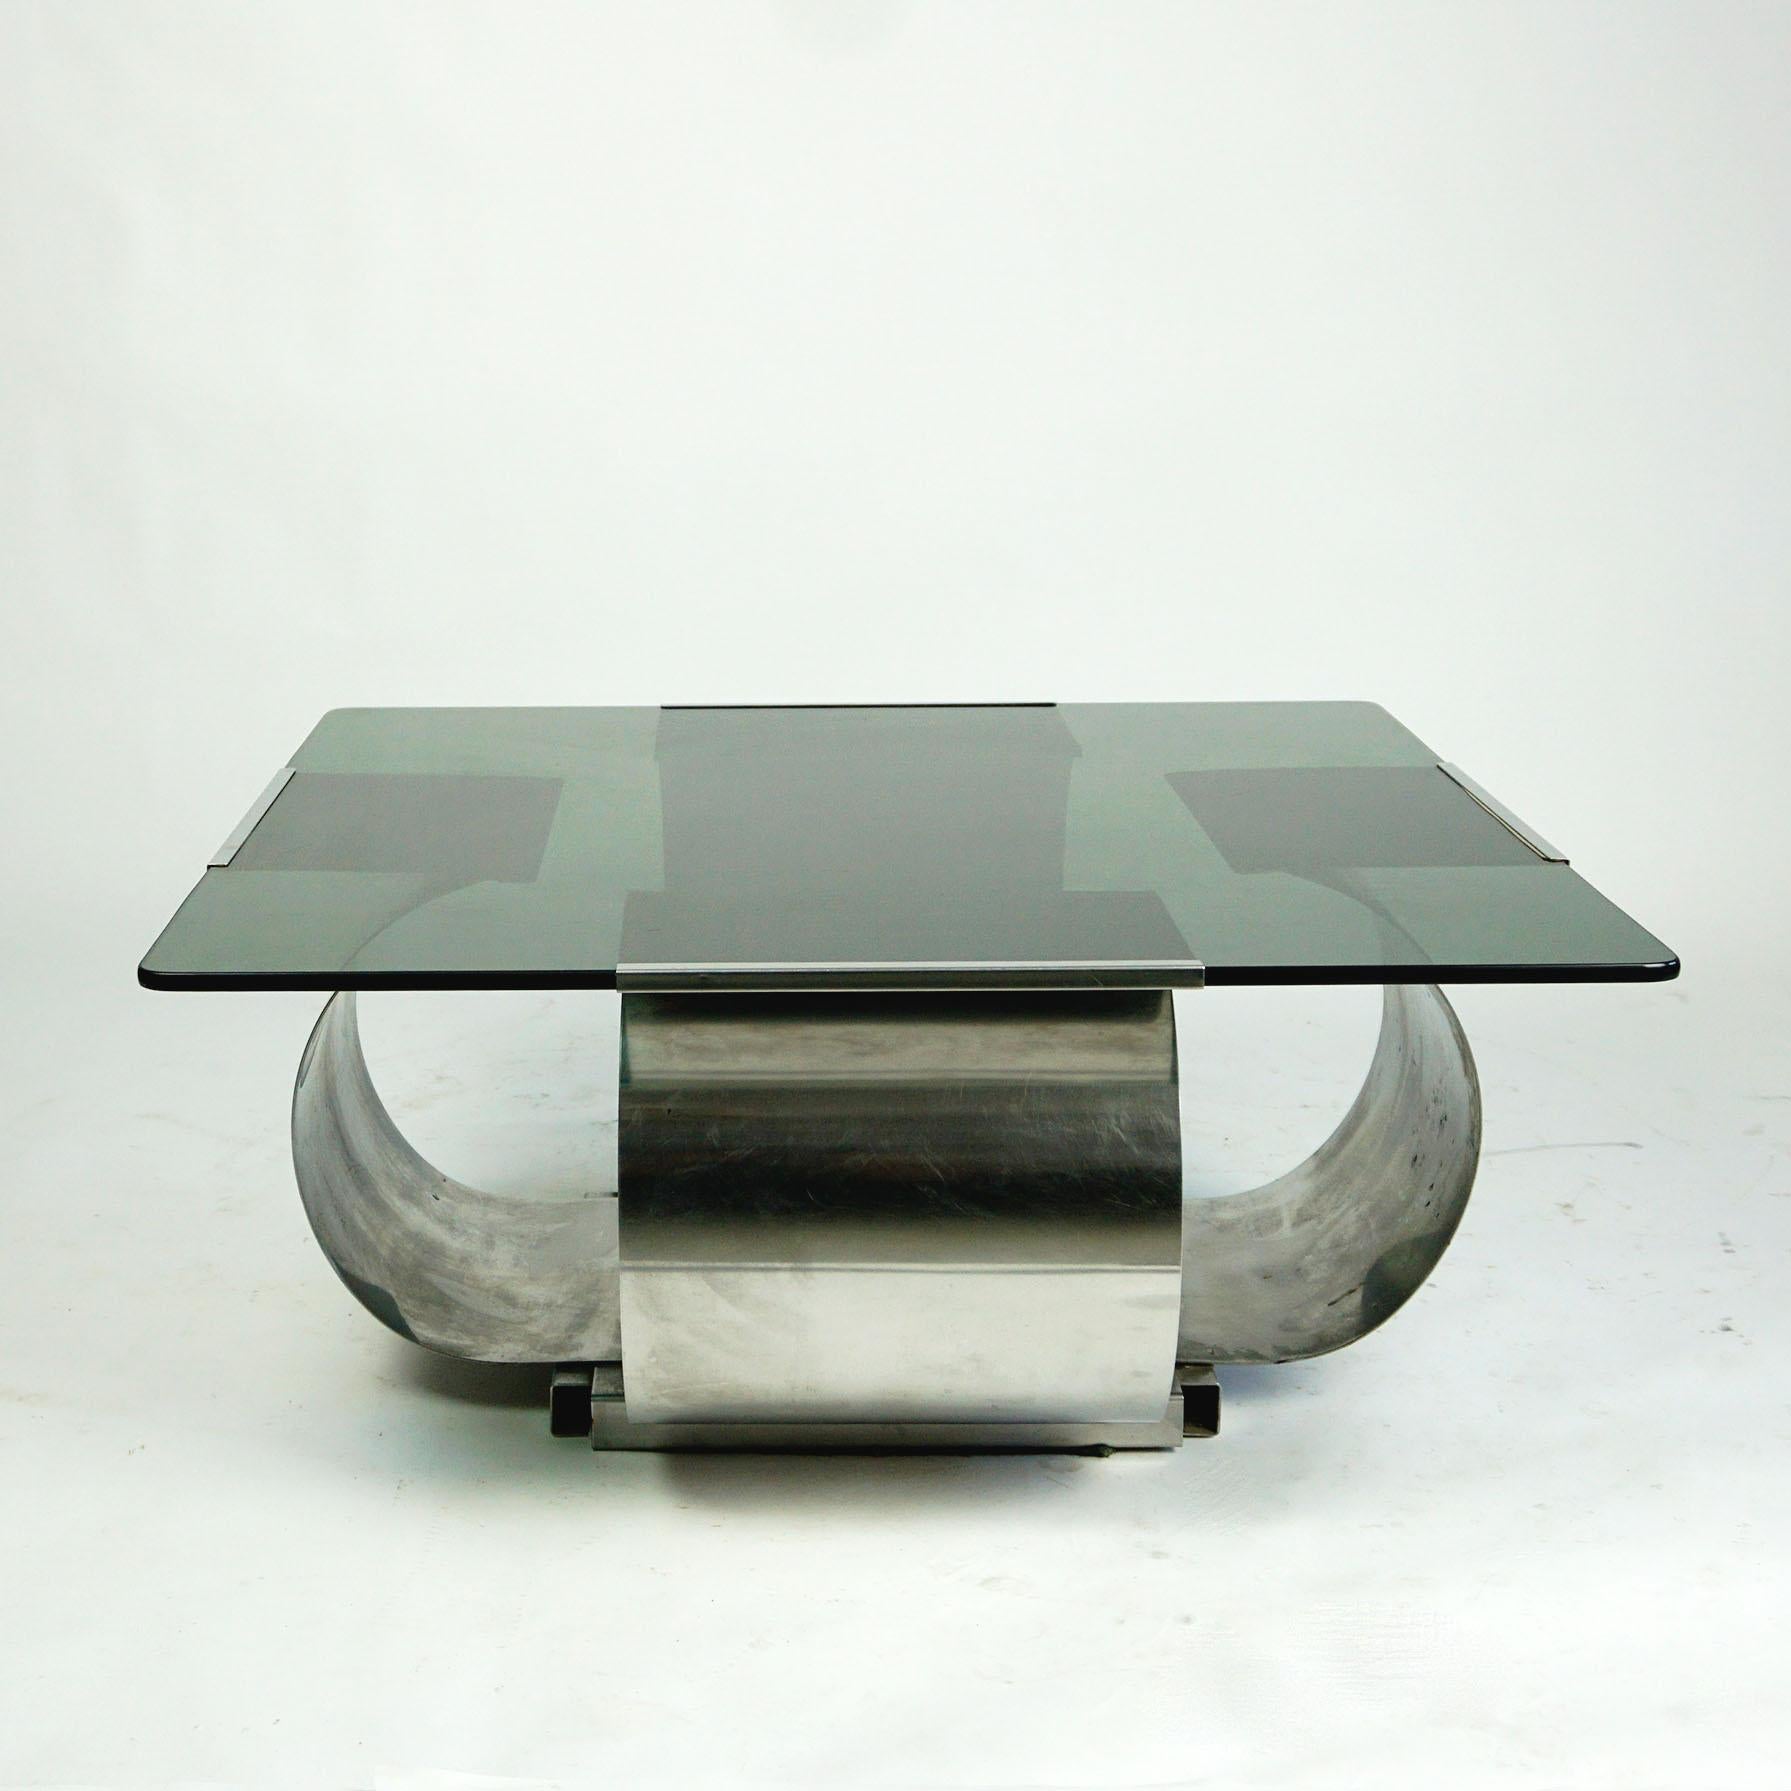 This eye catching smoked glass and brushed steel square coffee table was designed by Francois Monnet in the 70s and produced in France. It features a steel corpus with a smoked glass top and is in very good condition. 
It will be the perfect